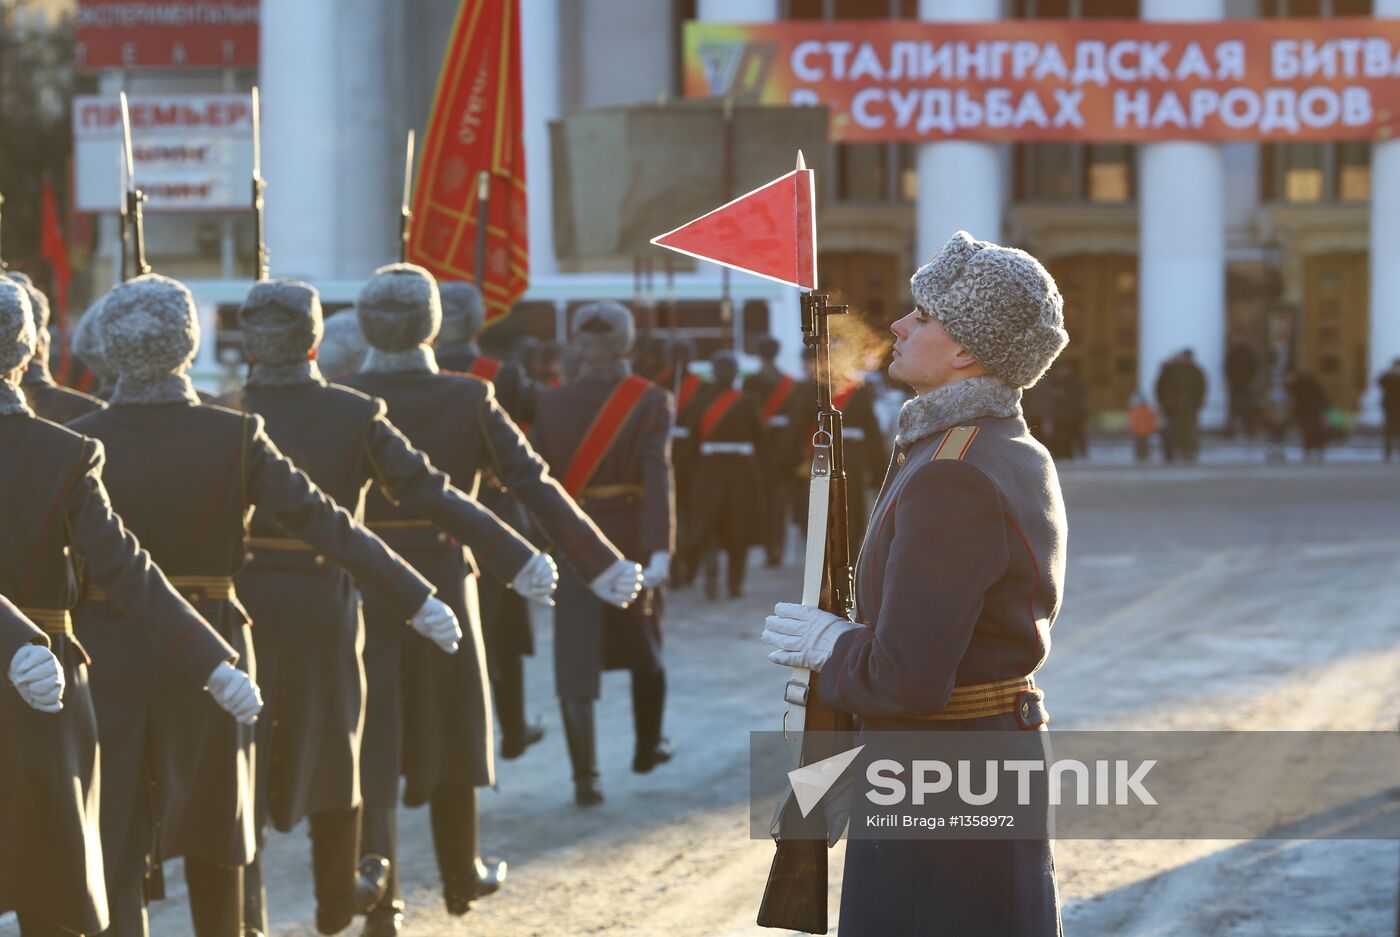 Parade rehearsal for 70th anniversary of Battle of Stalingrad